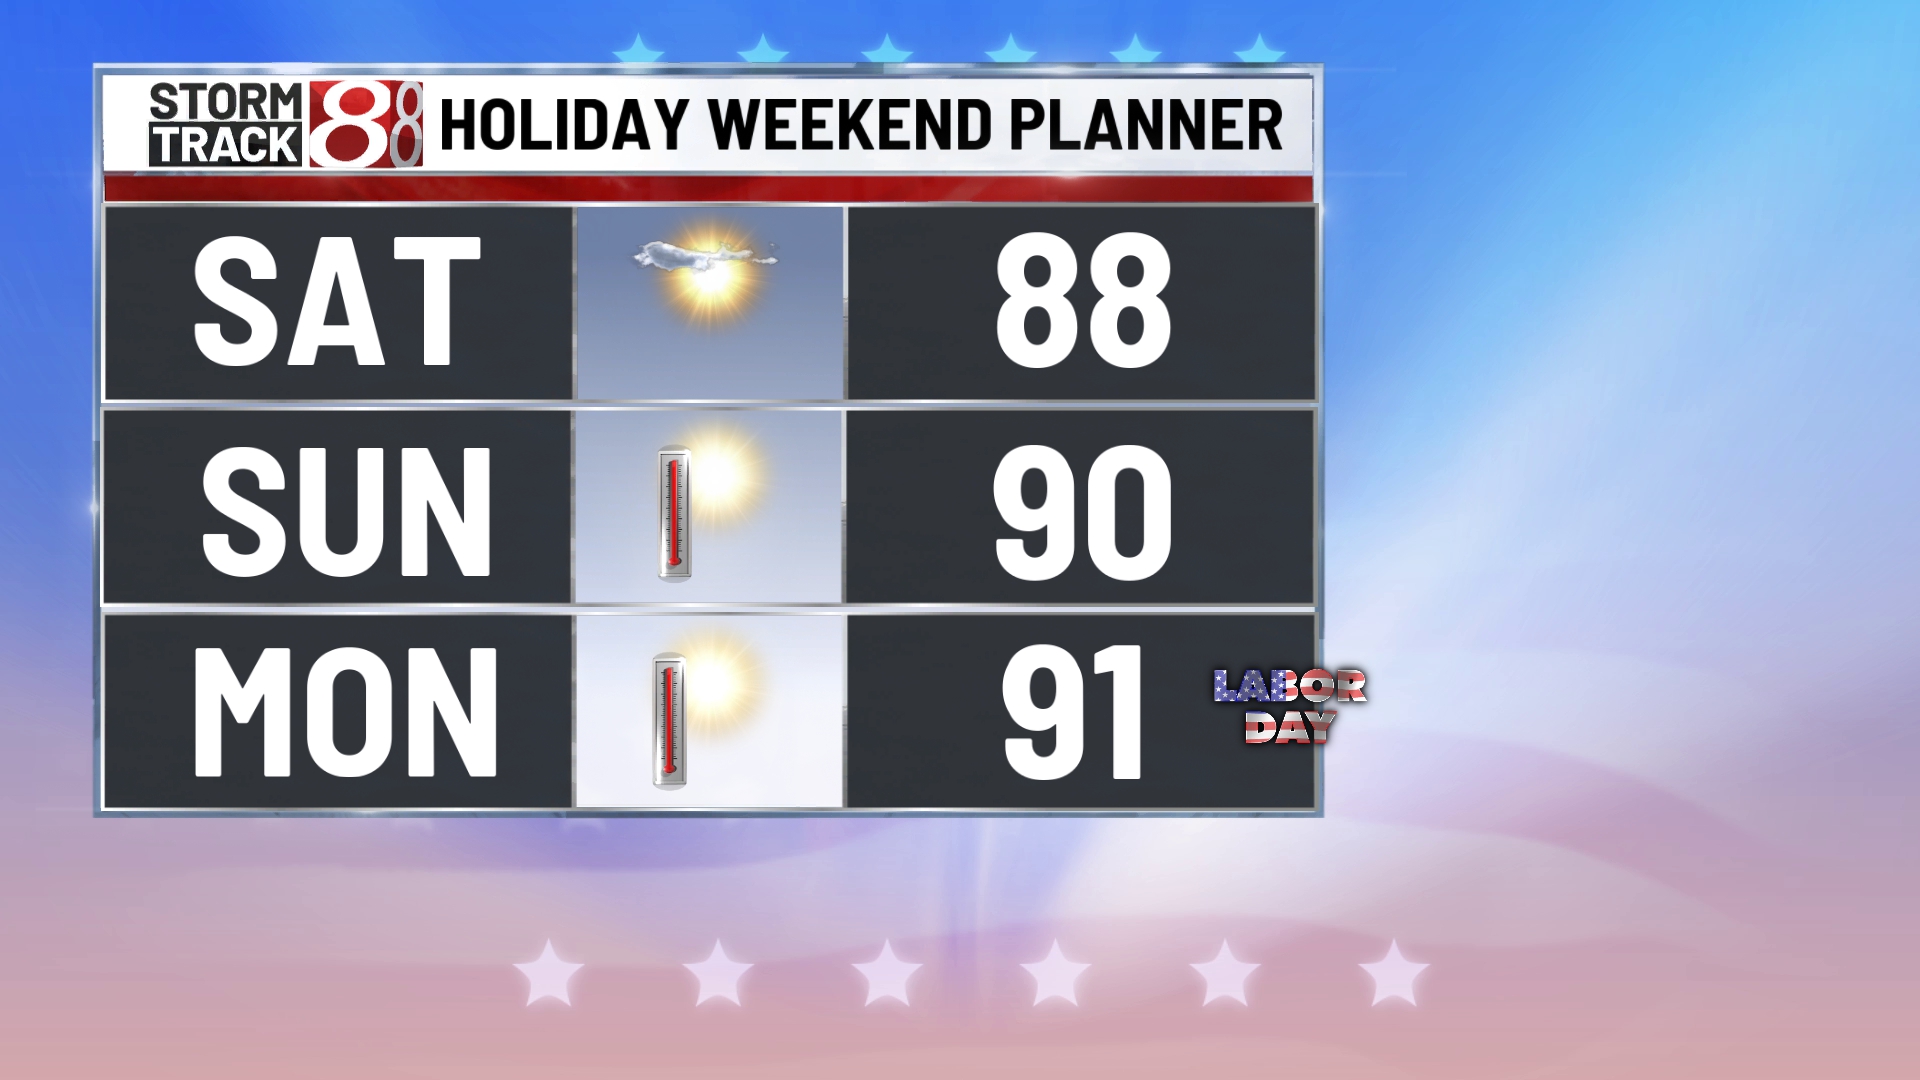 Warmer Friday ahead. 90’s return for the holiday weekend